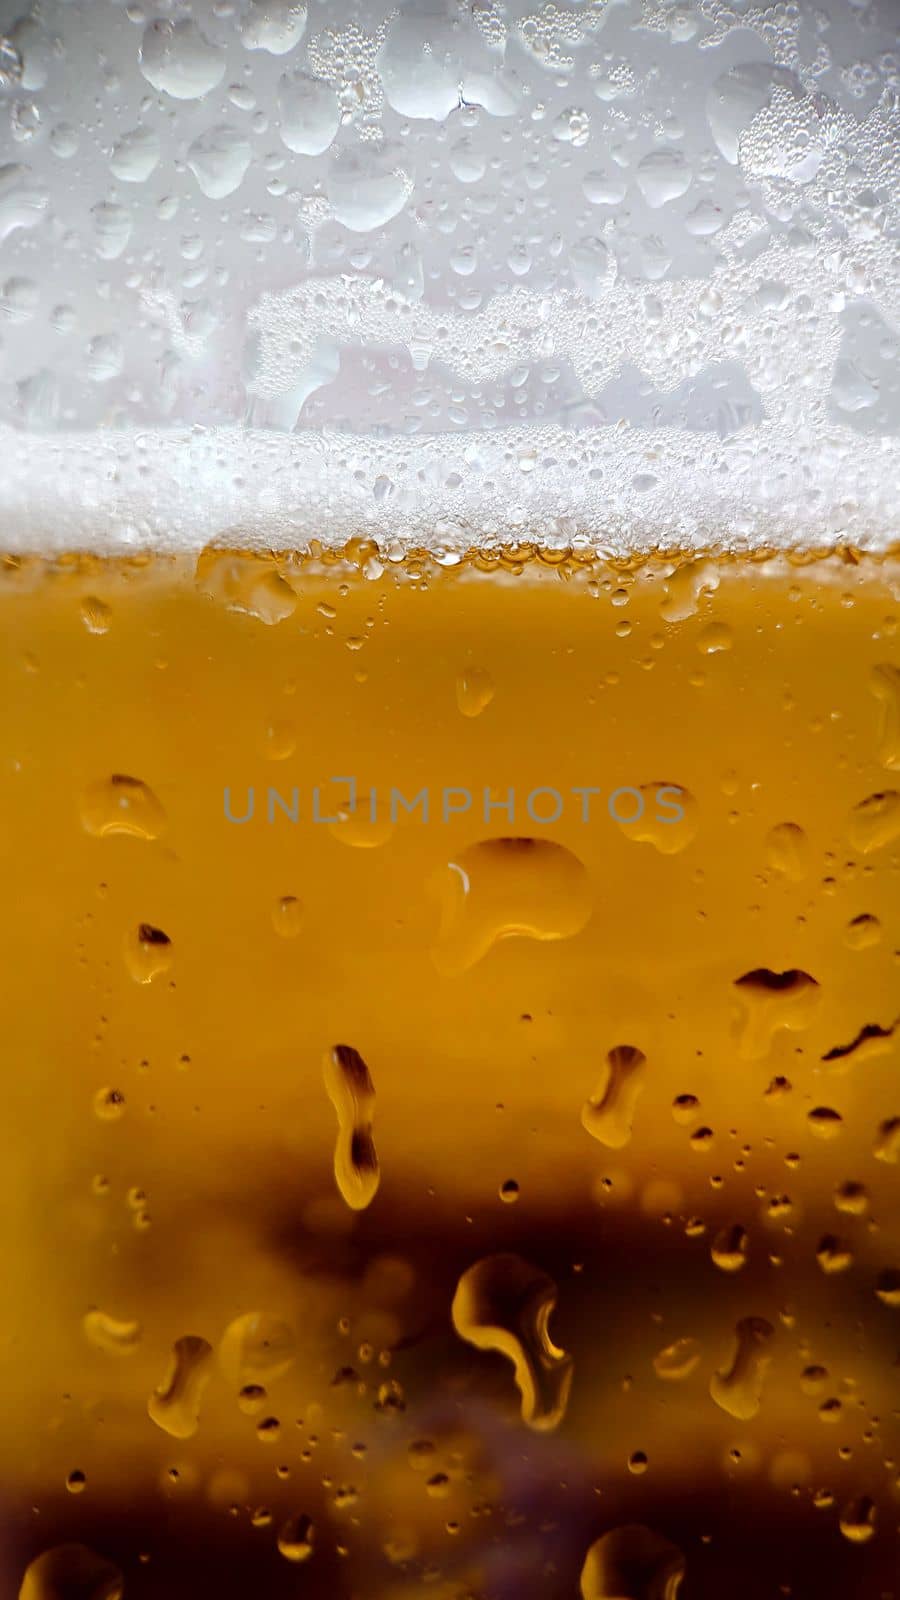 White foam and condensation drops on the walls of a glass of chilled beer.Texture or background.Macrophotography.